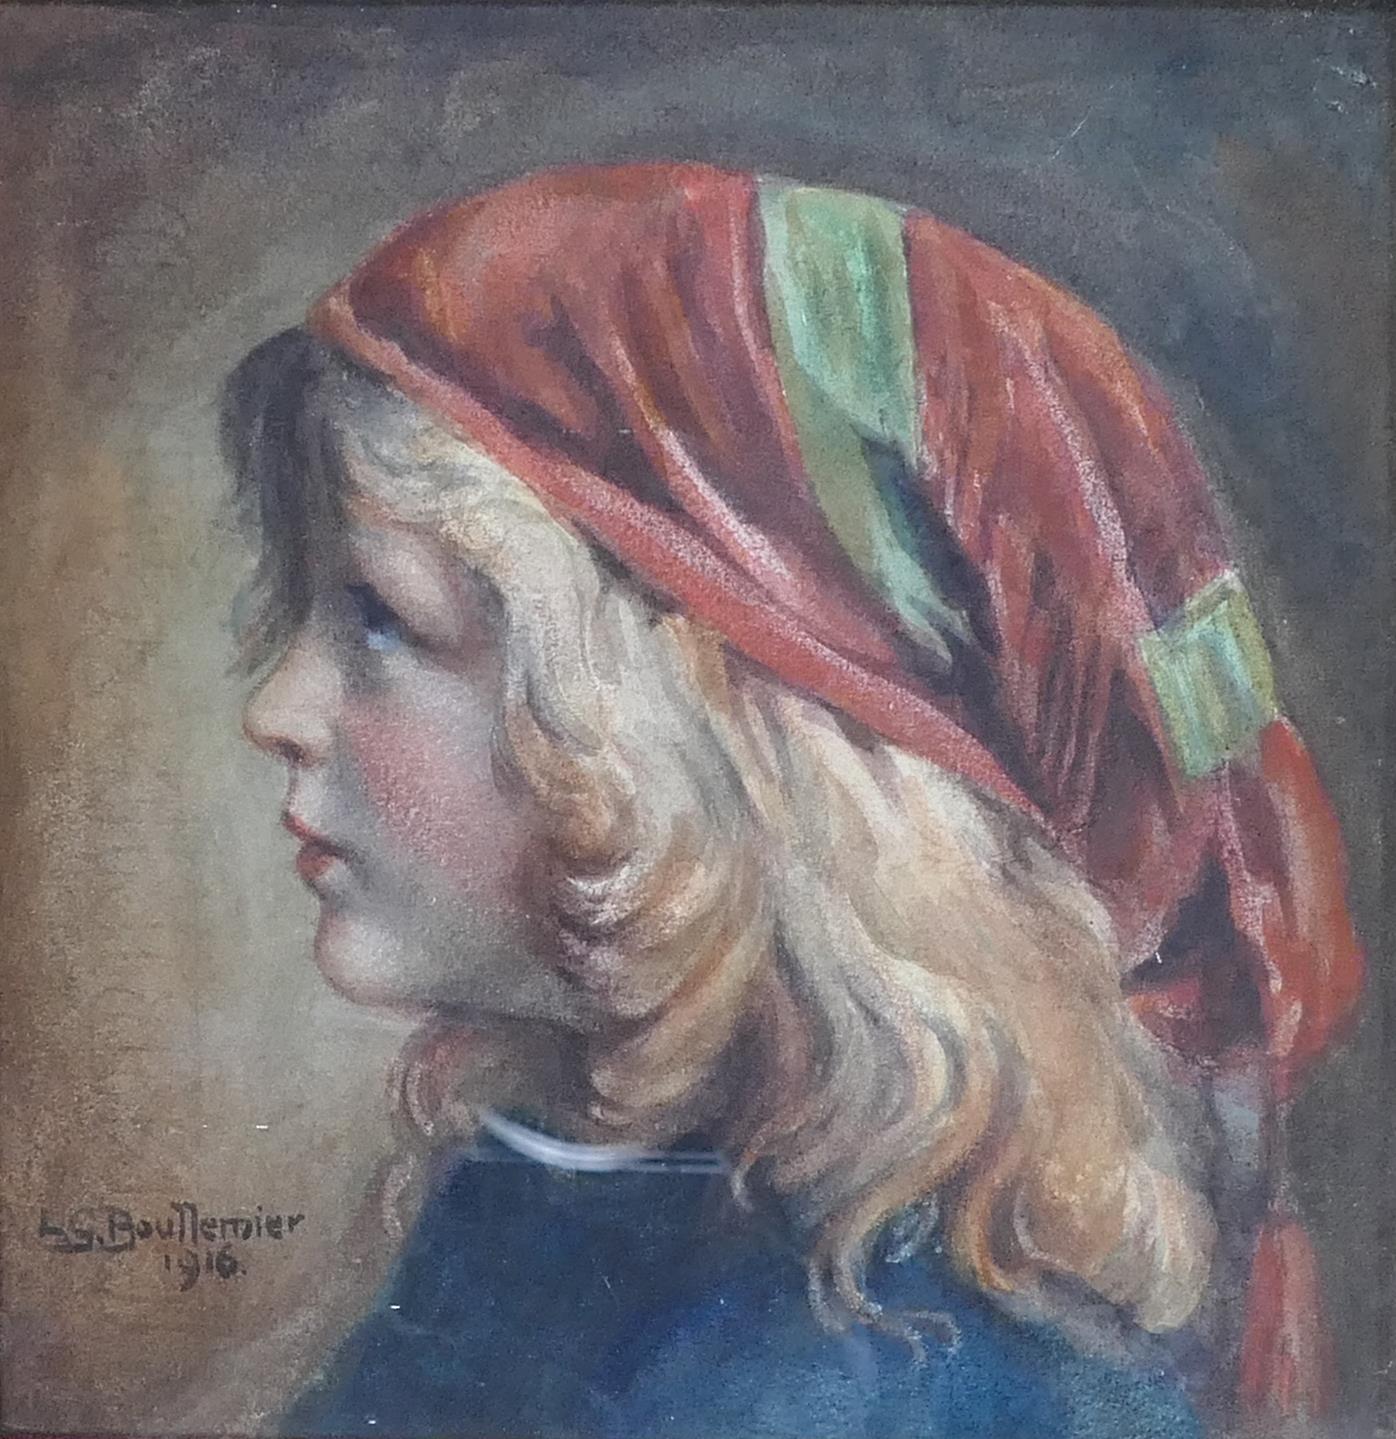 L G Boullemier small watercolour & pastel of young child, signed dated 1916, 22cm x 22cm excluding